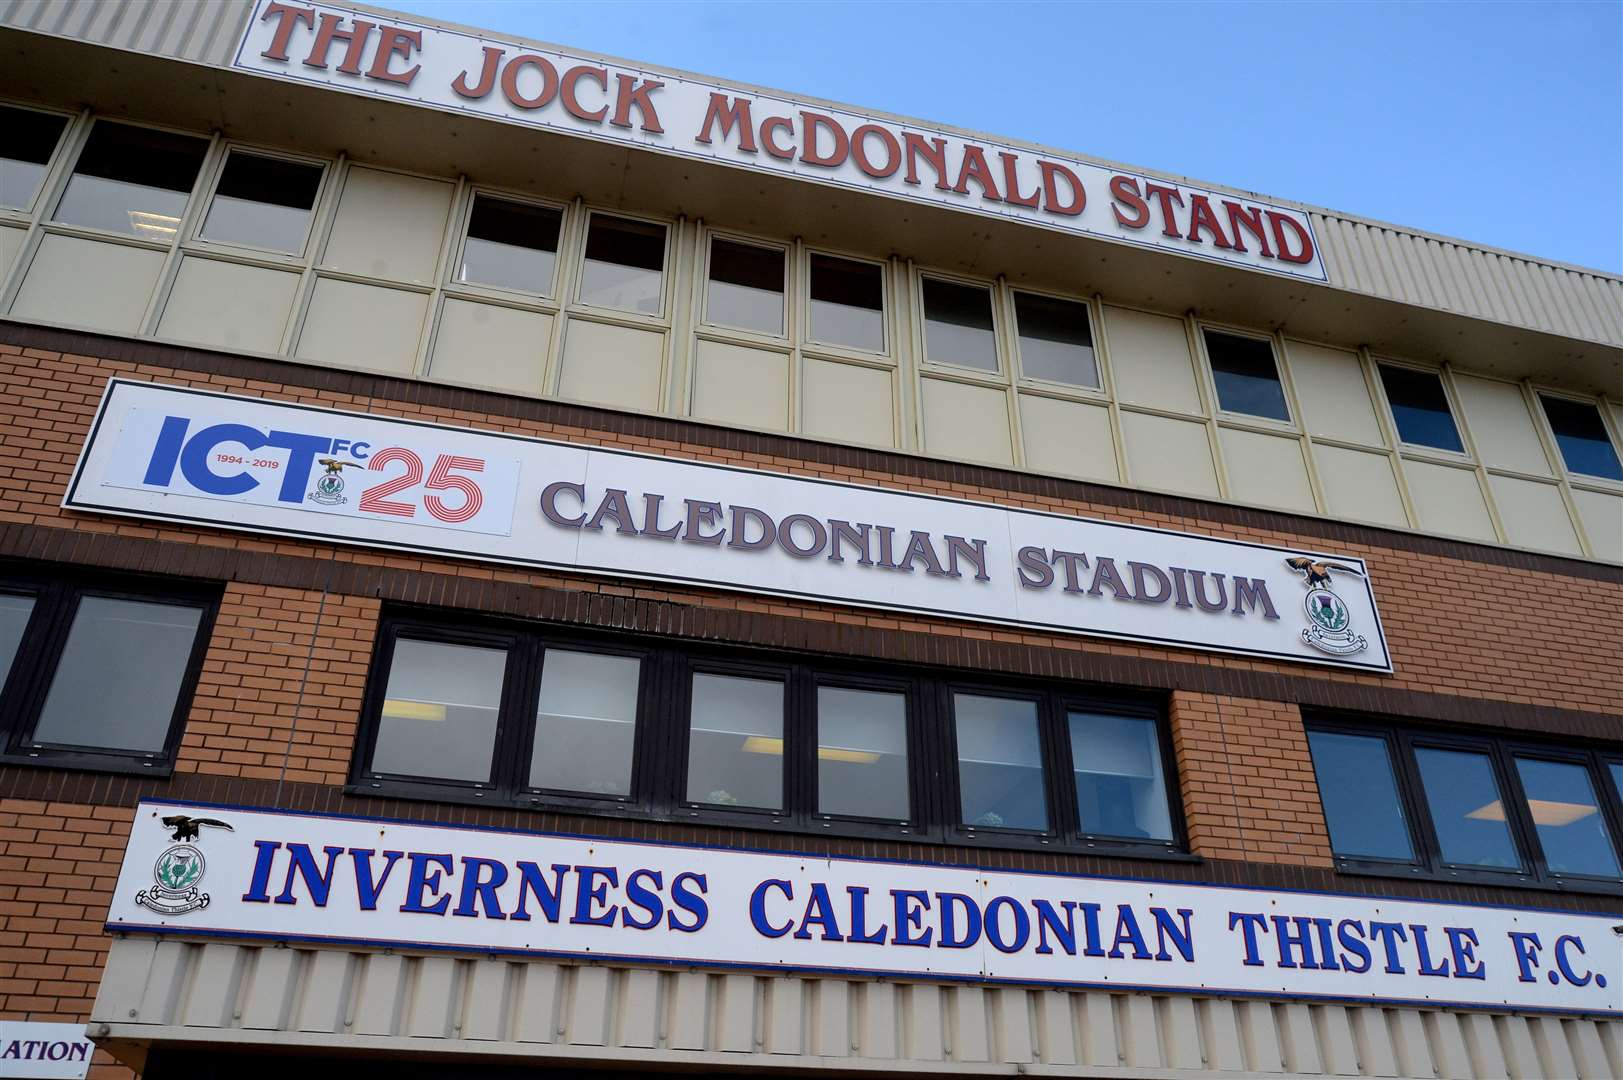 Inverness Caledonian Thistle recorded a loss of £892,000.